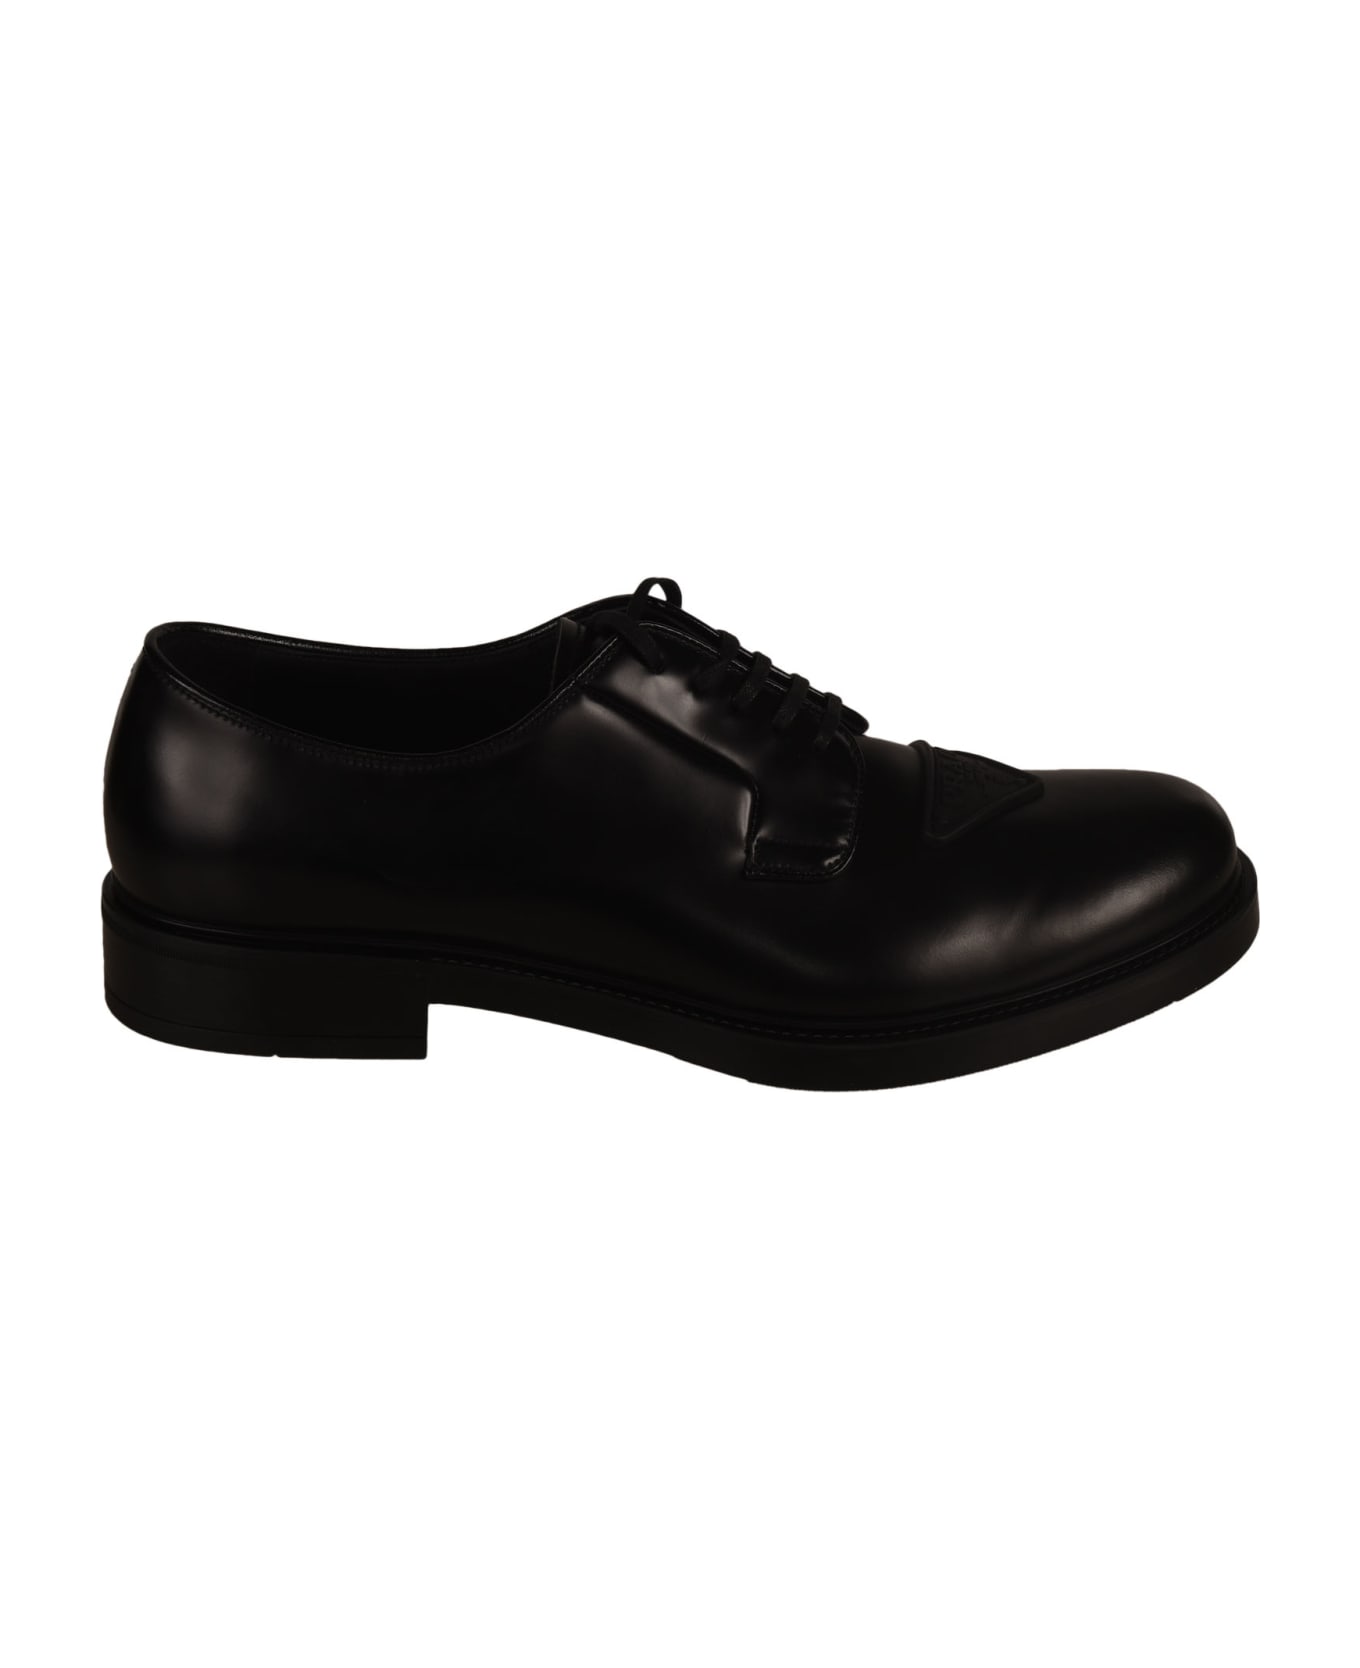 Prada Logo Patched Derby what Shoes - Black